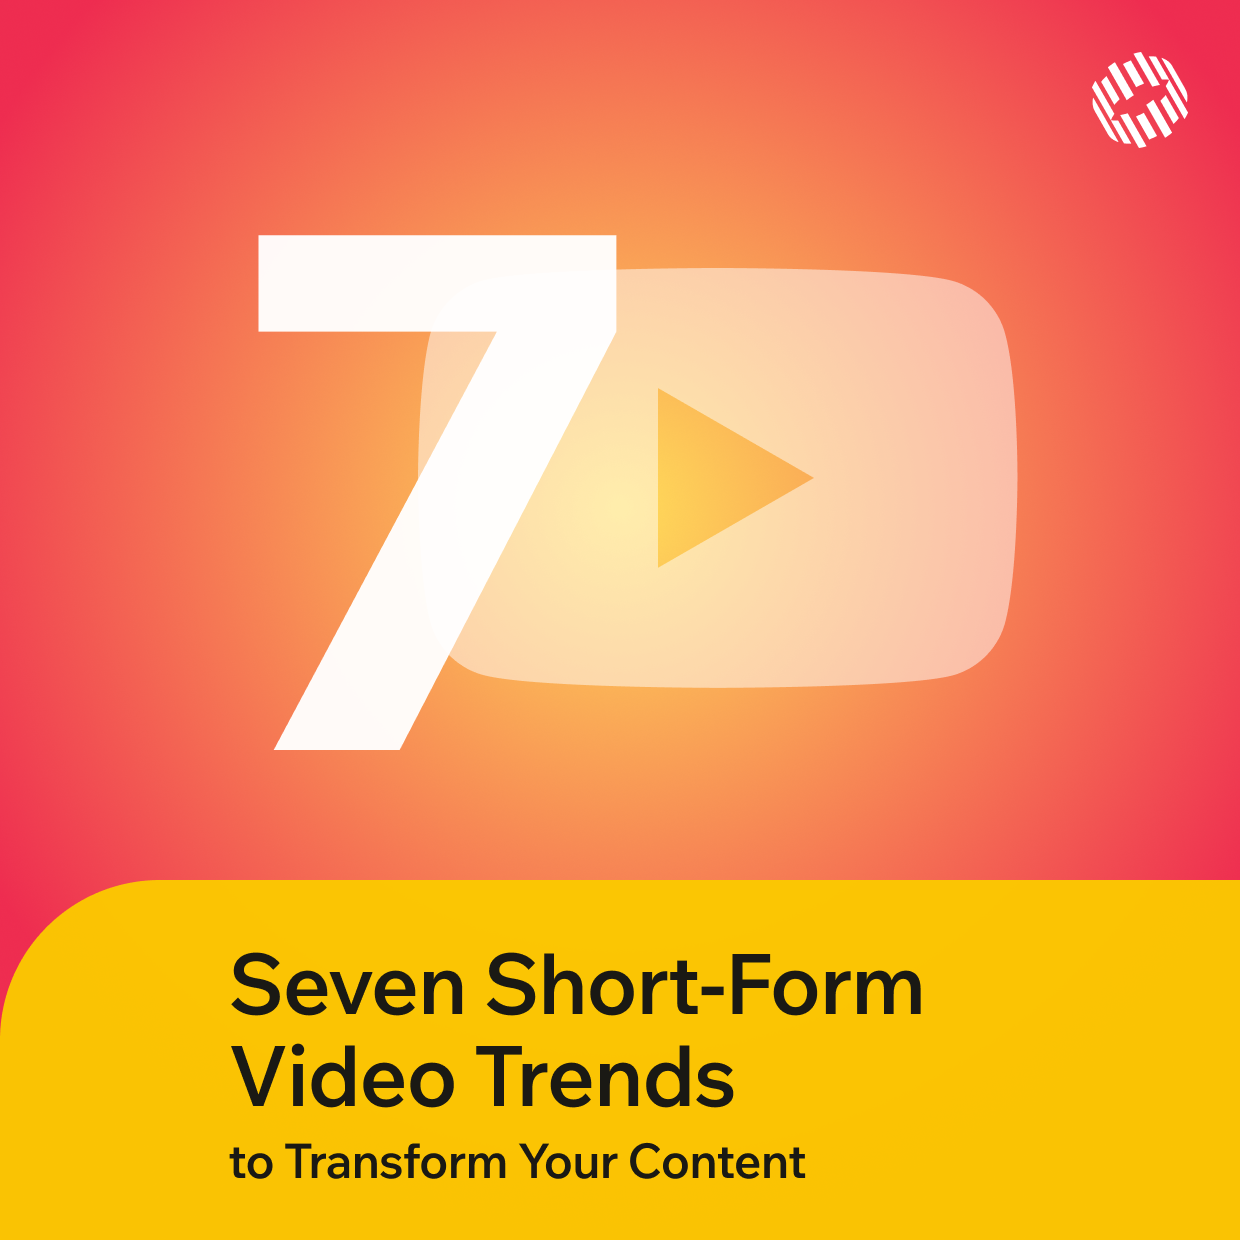 7 short-form video trends to transform your content